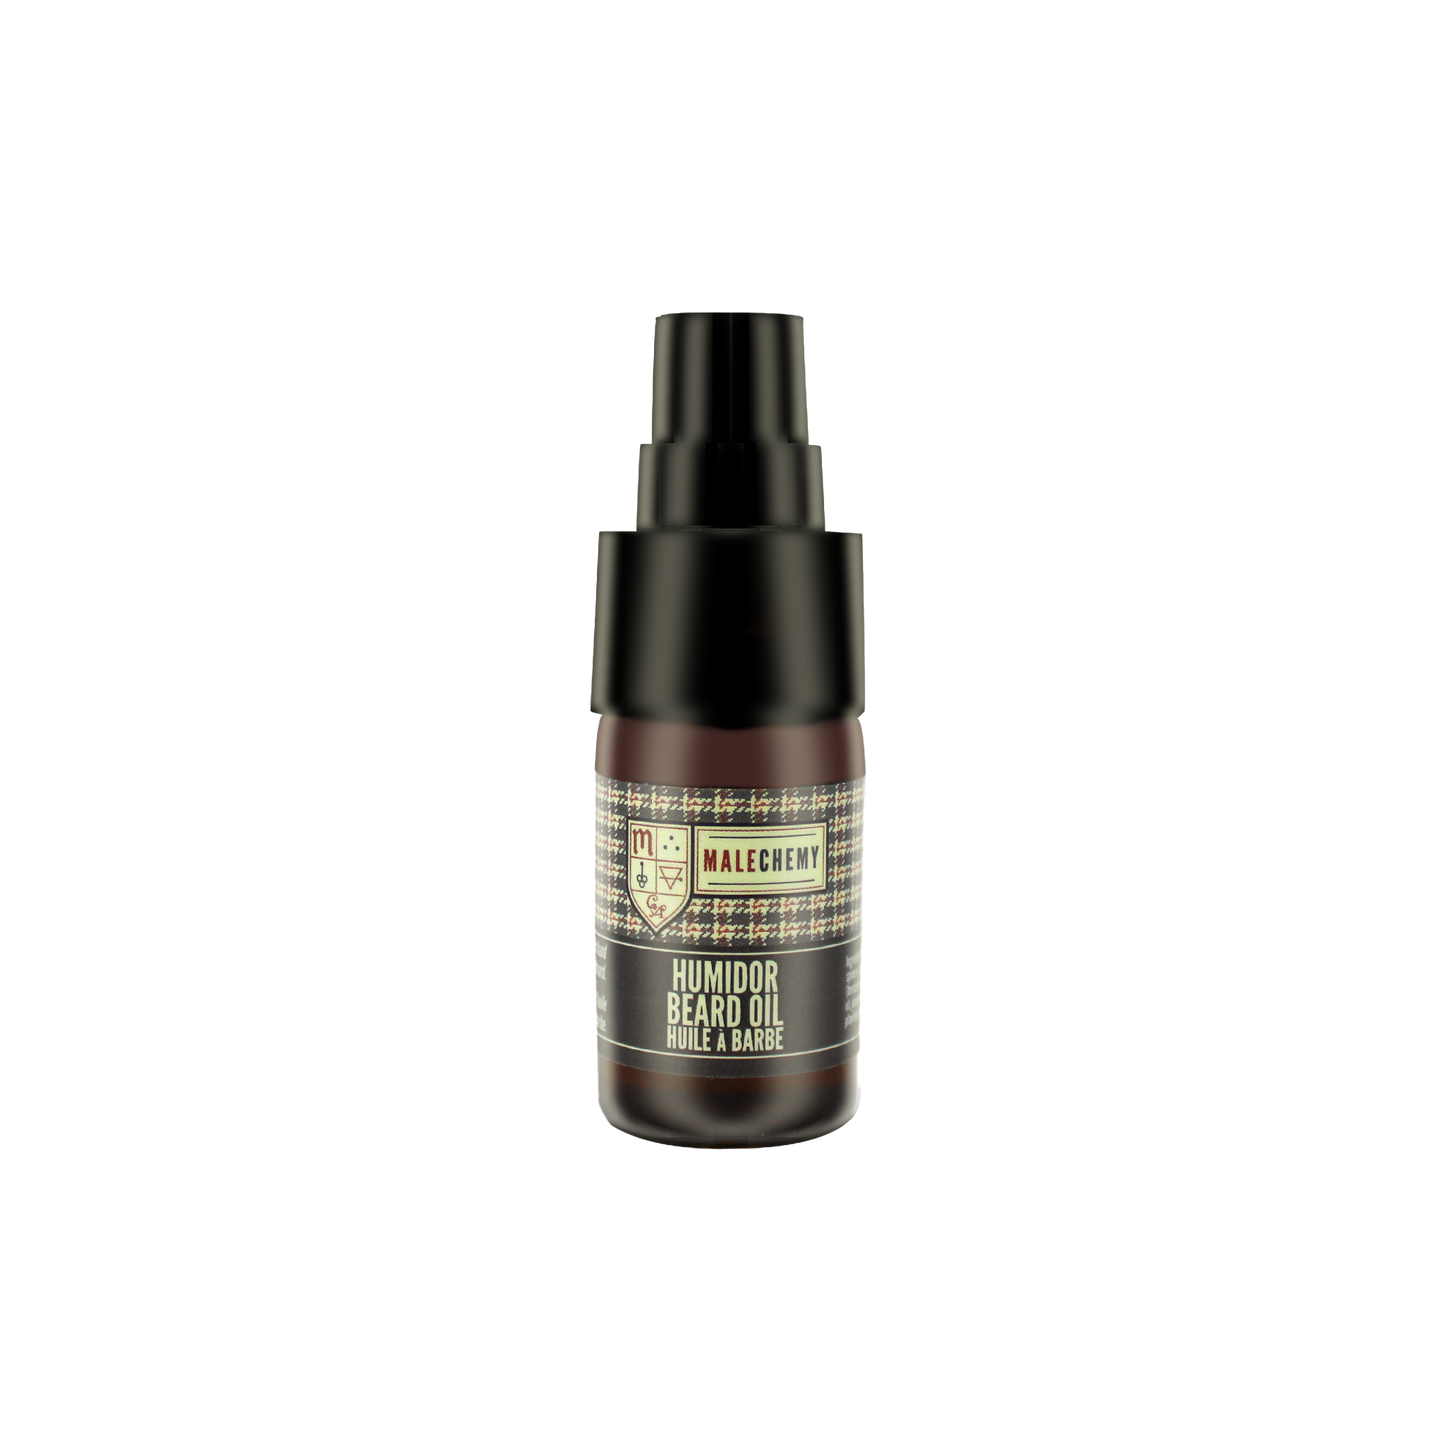 natural beard oil with tobacco flower, cedar, and vanilla